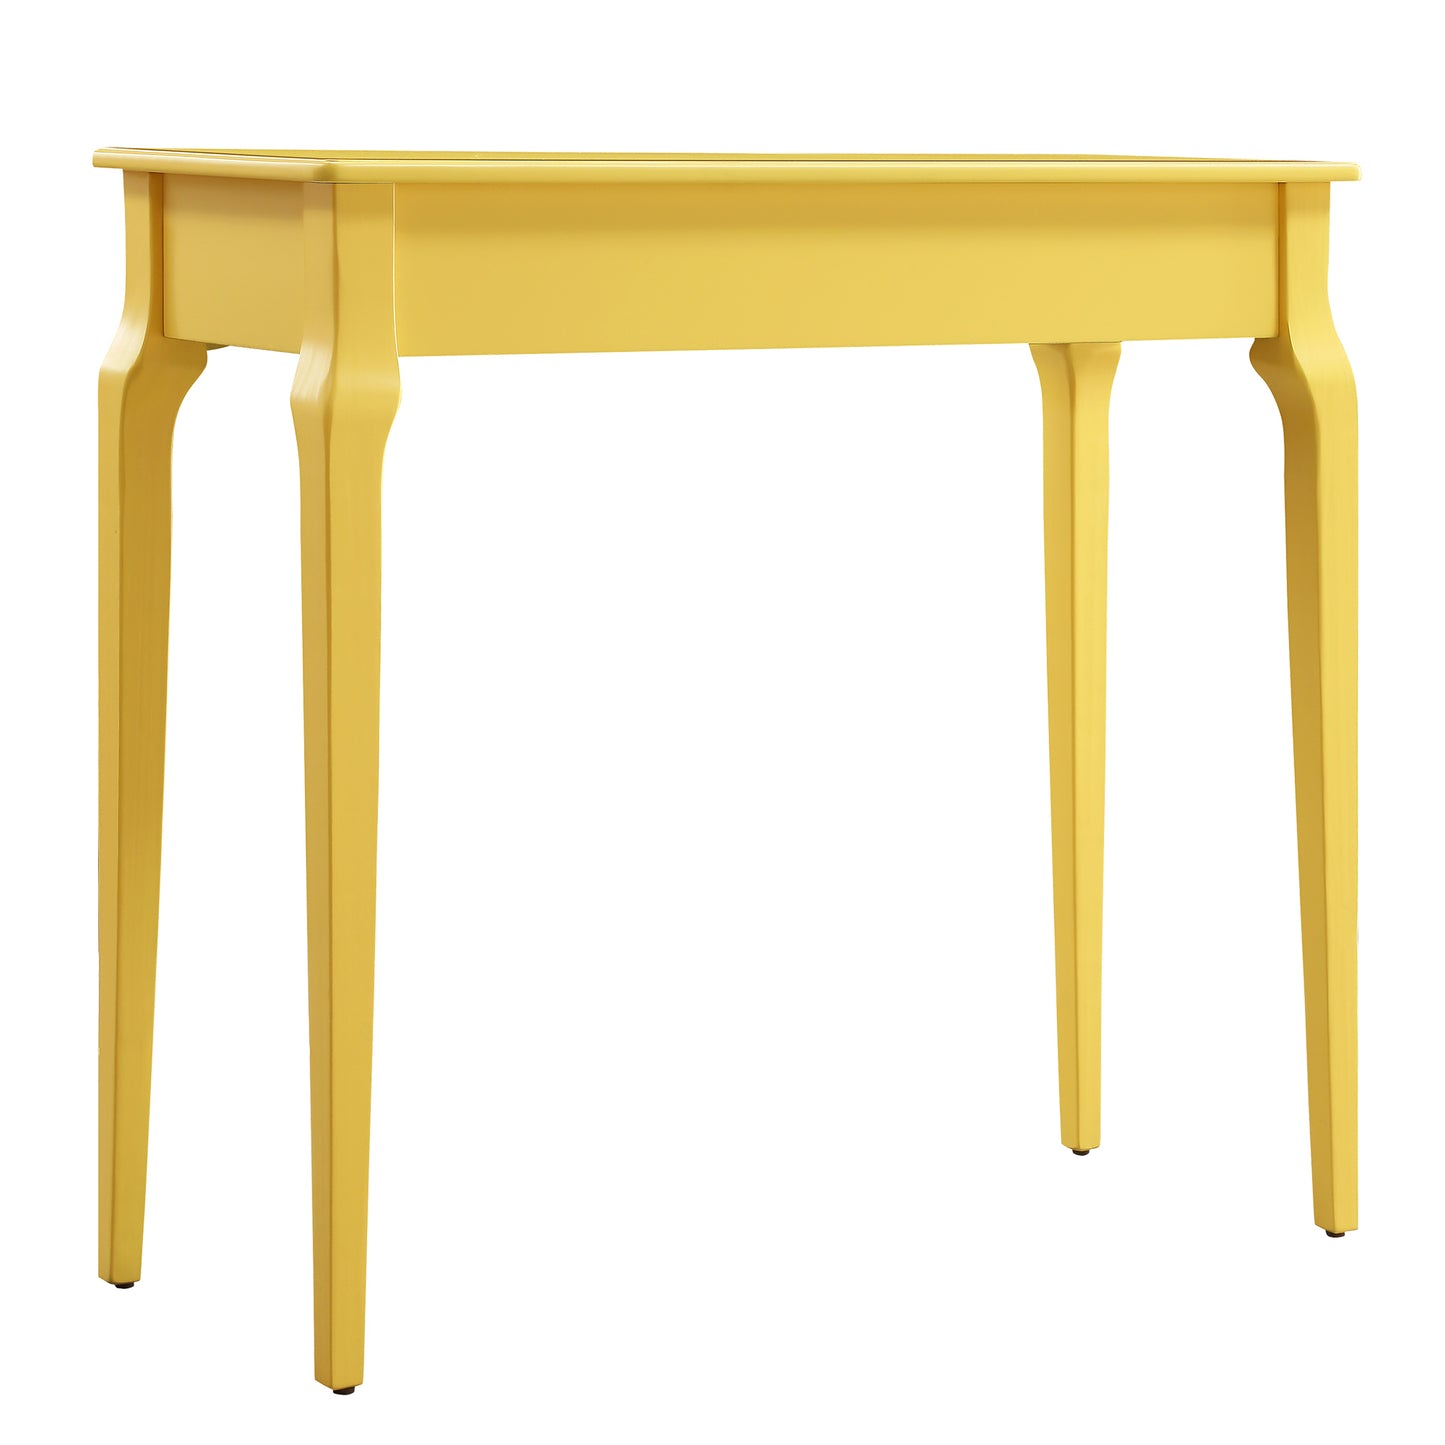 1-Drawer Wood Accent Console Sofa Table - Yellow